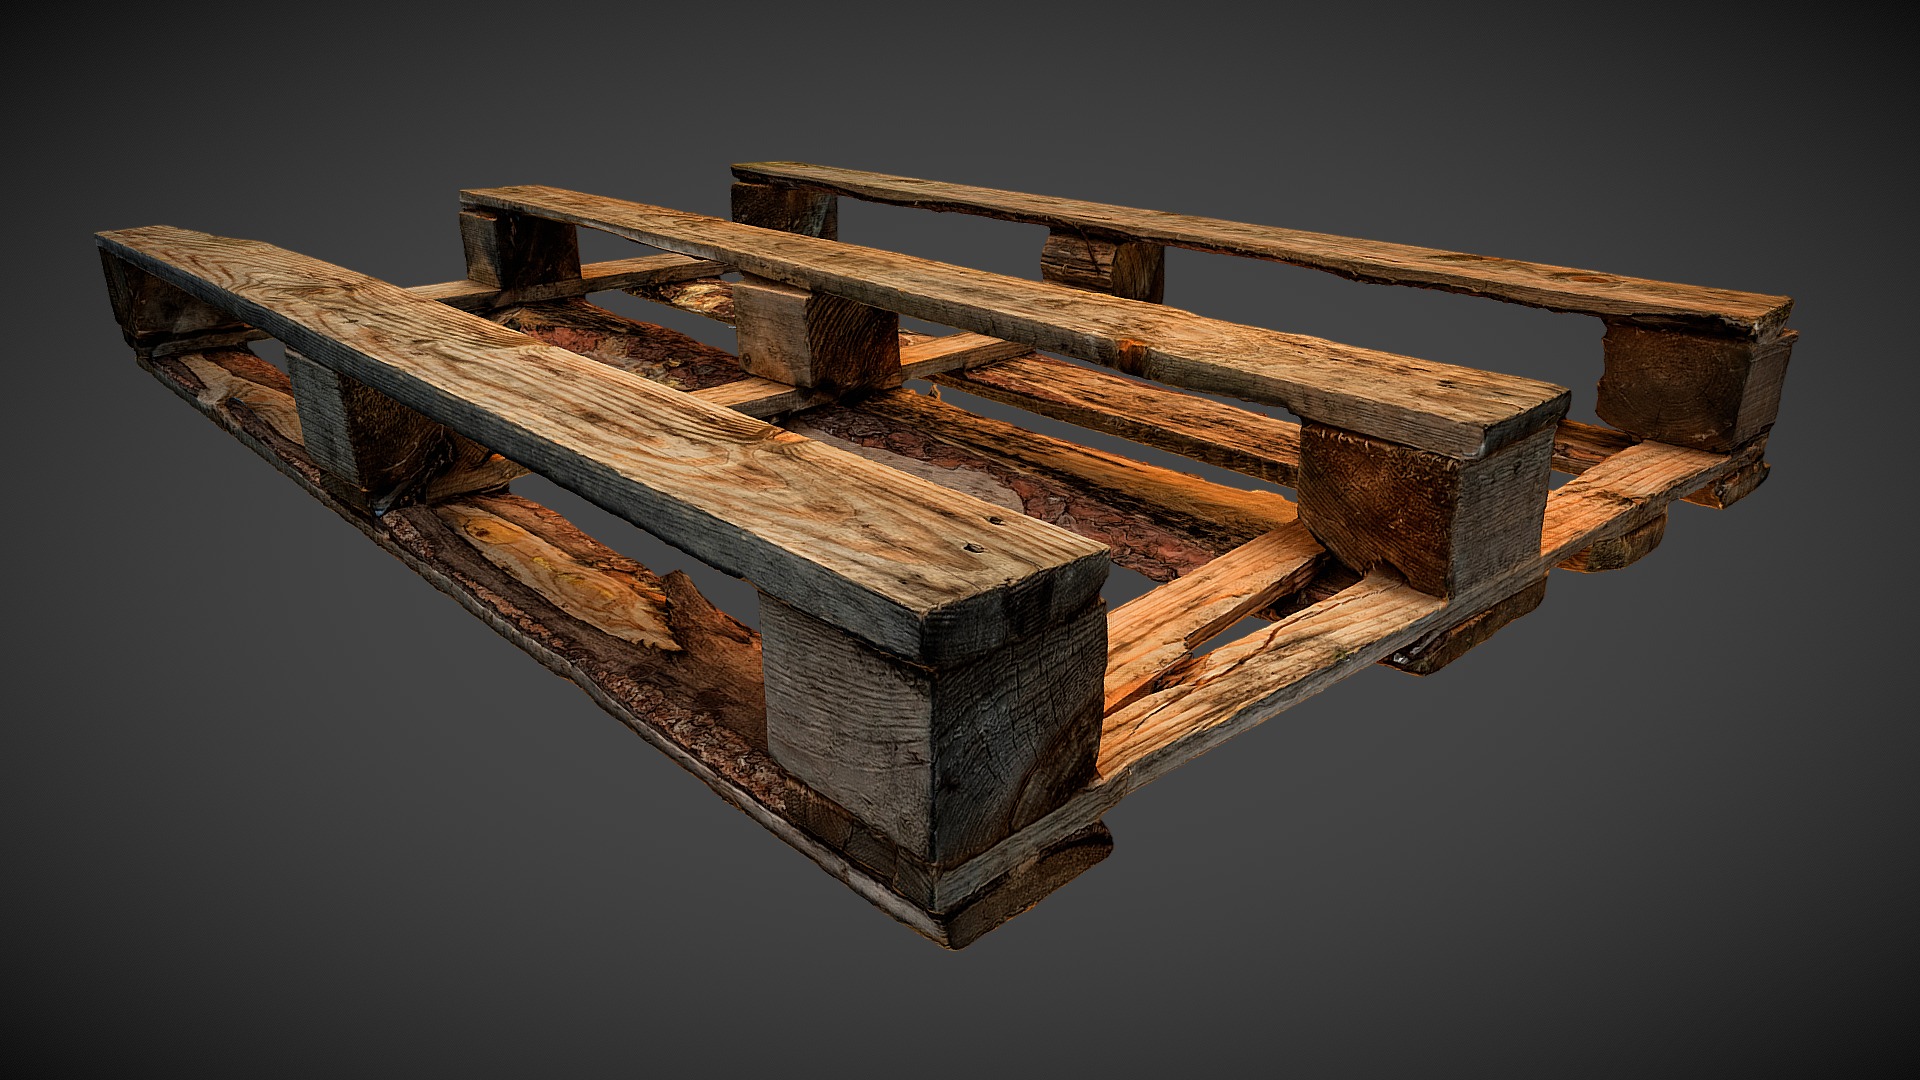 3D model Wooden Pallet ART (RAW 3d scan) - This is a 3D model of the Wooden Pallet ART (RAW 3d scan). The 3D model is about a wooden bench with a wooden seat.